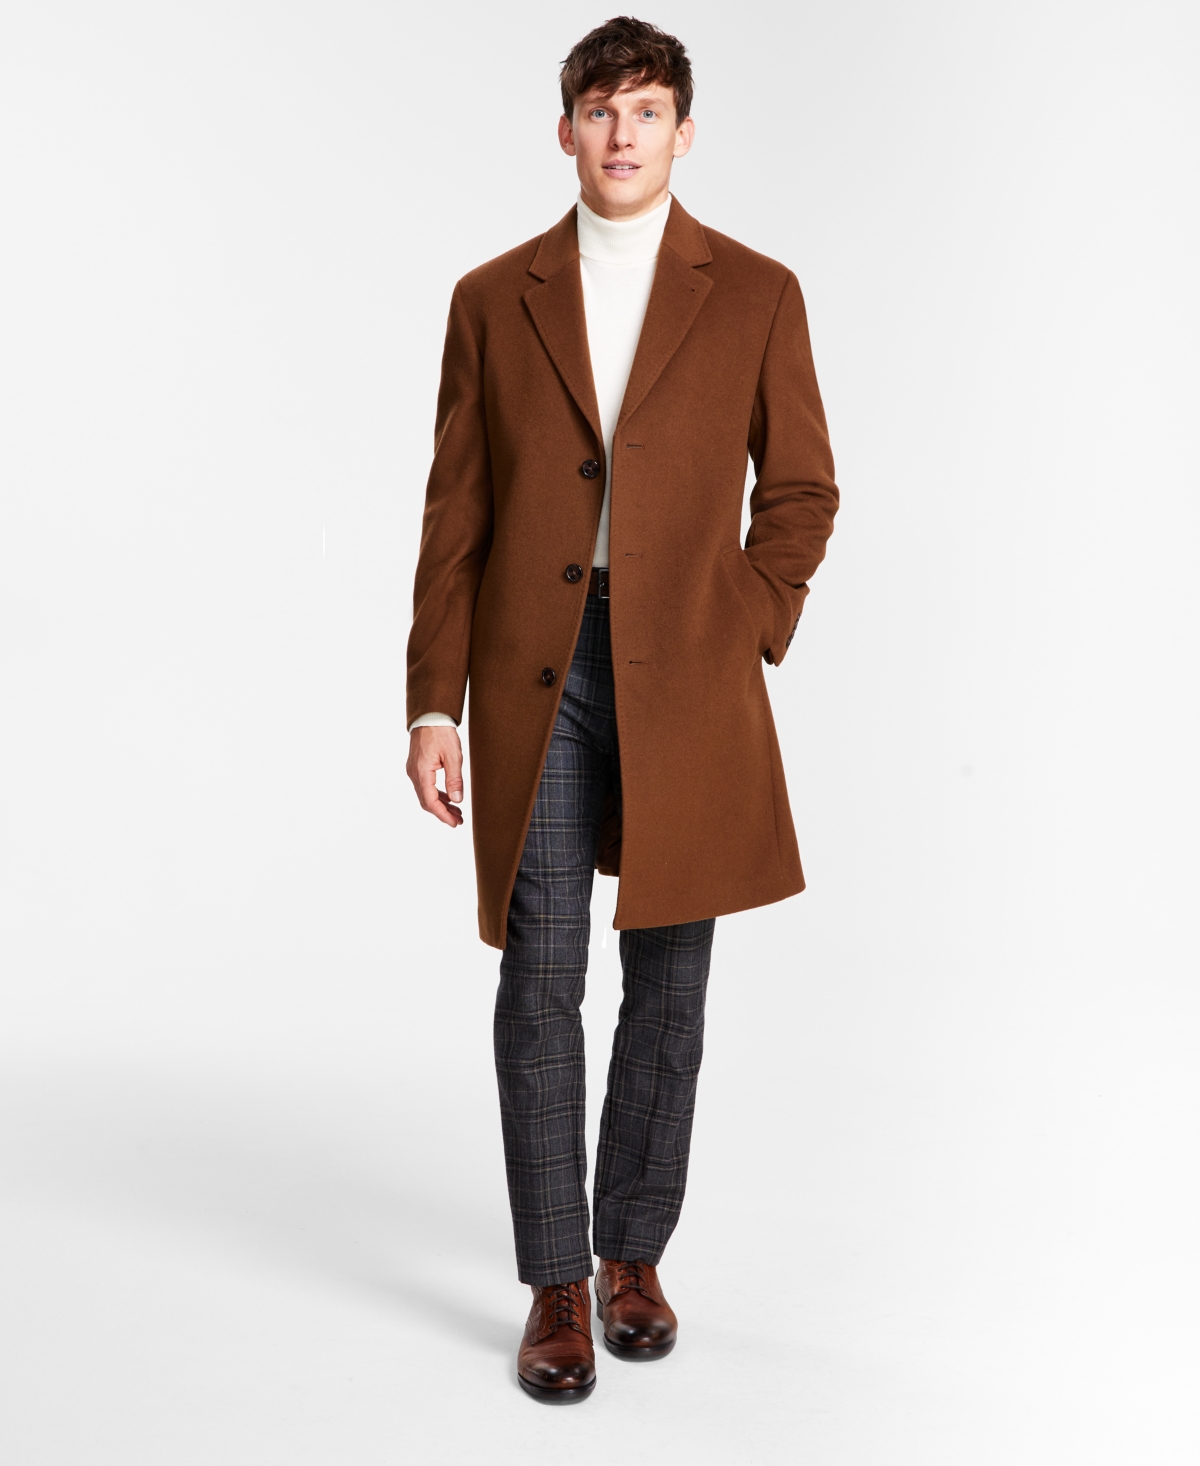 Michael Kors Men's Classic Fit Luxury Wool Cashmere Blend Overcoats In Vicuna